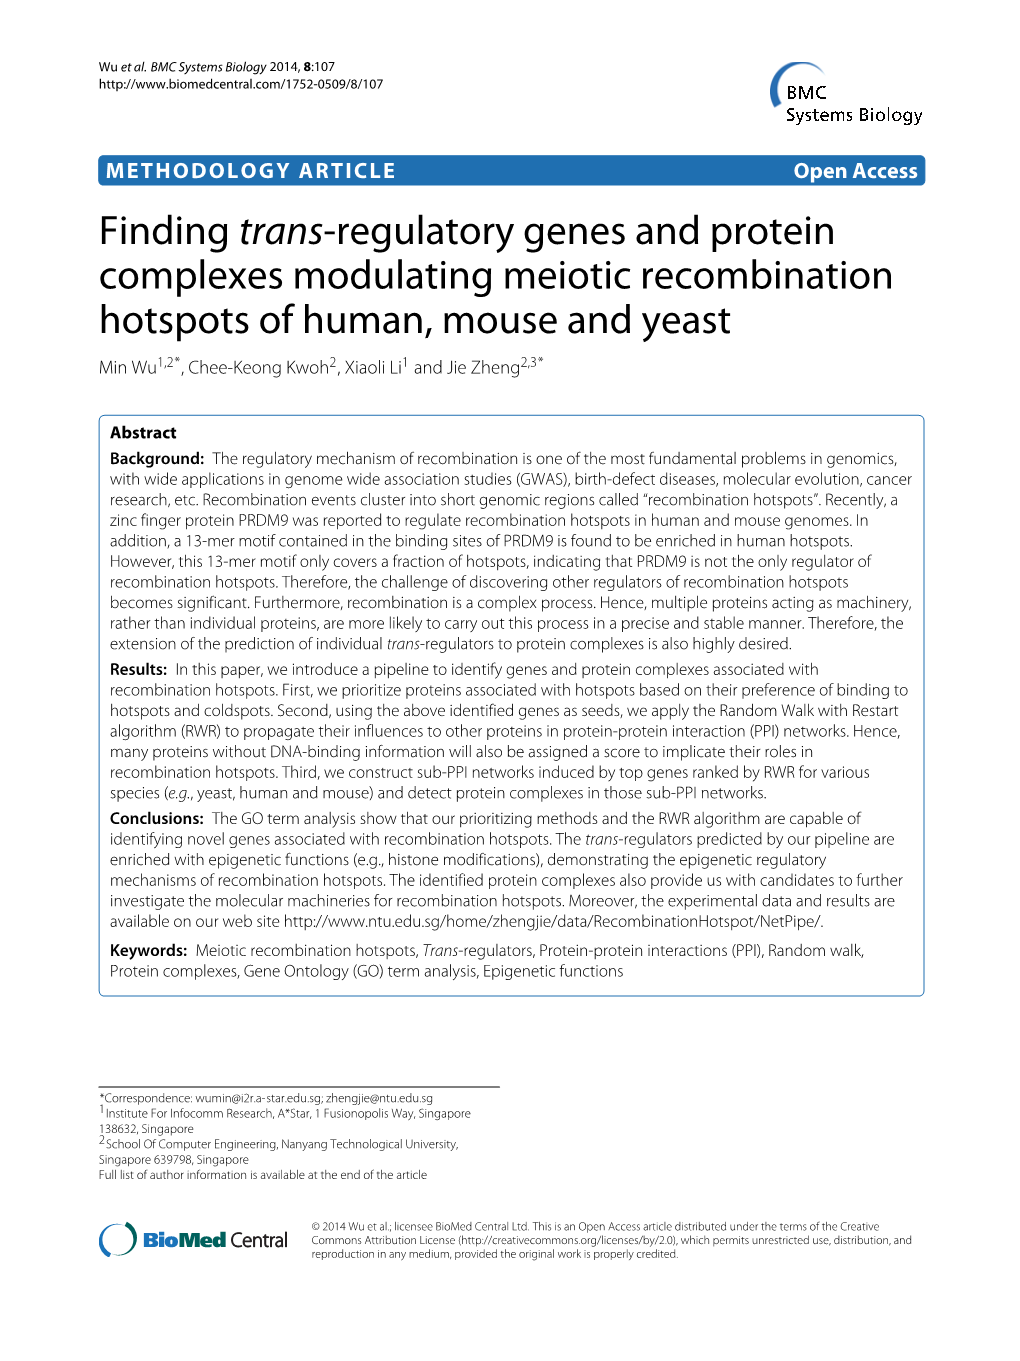 Finding Trans-Regulatory Genes and Protein Complexes Modulating